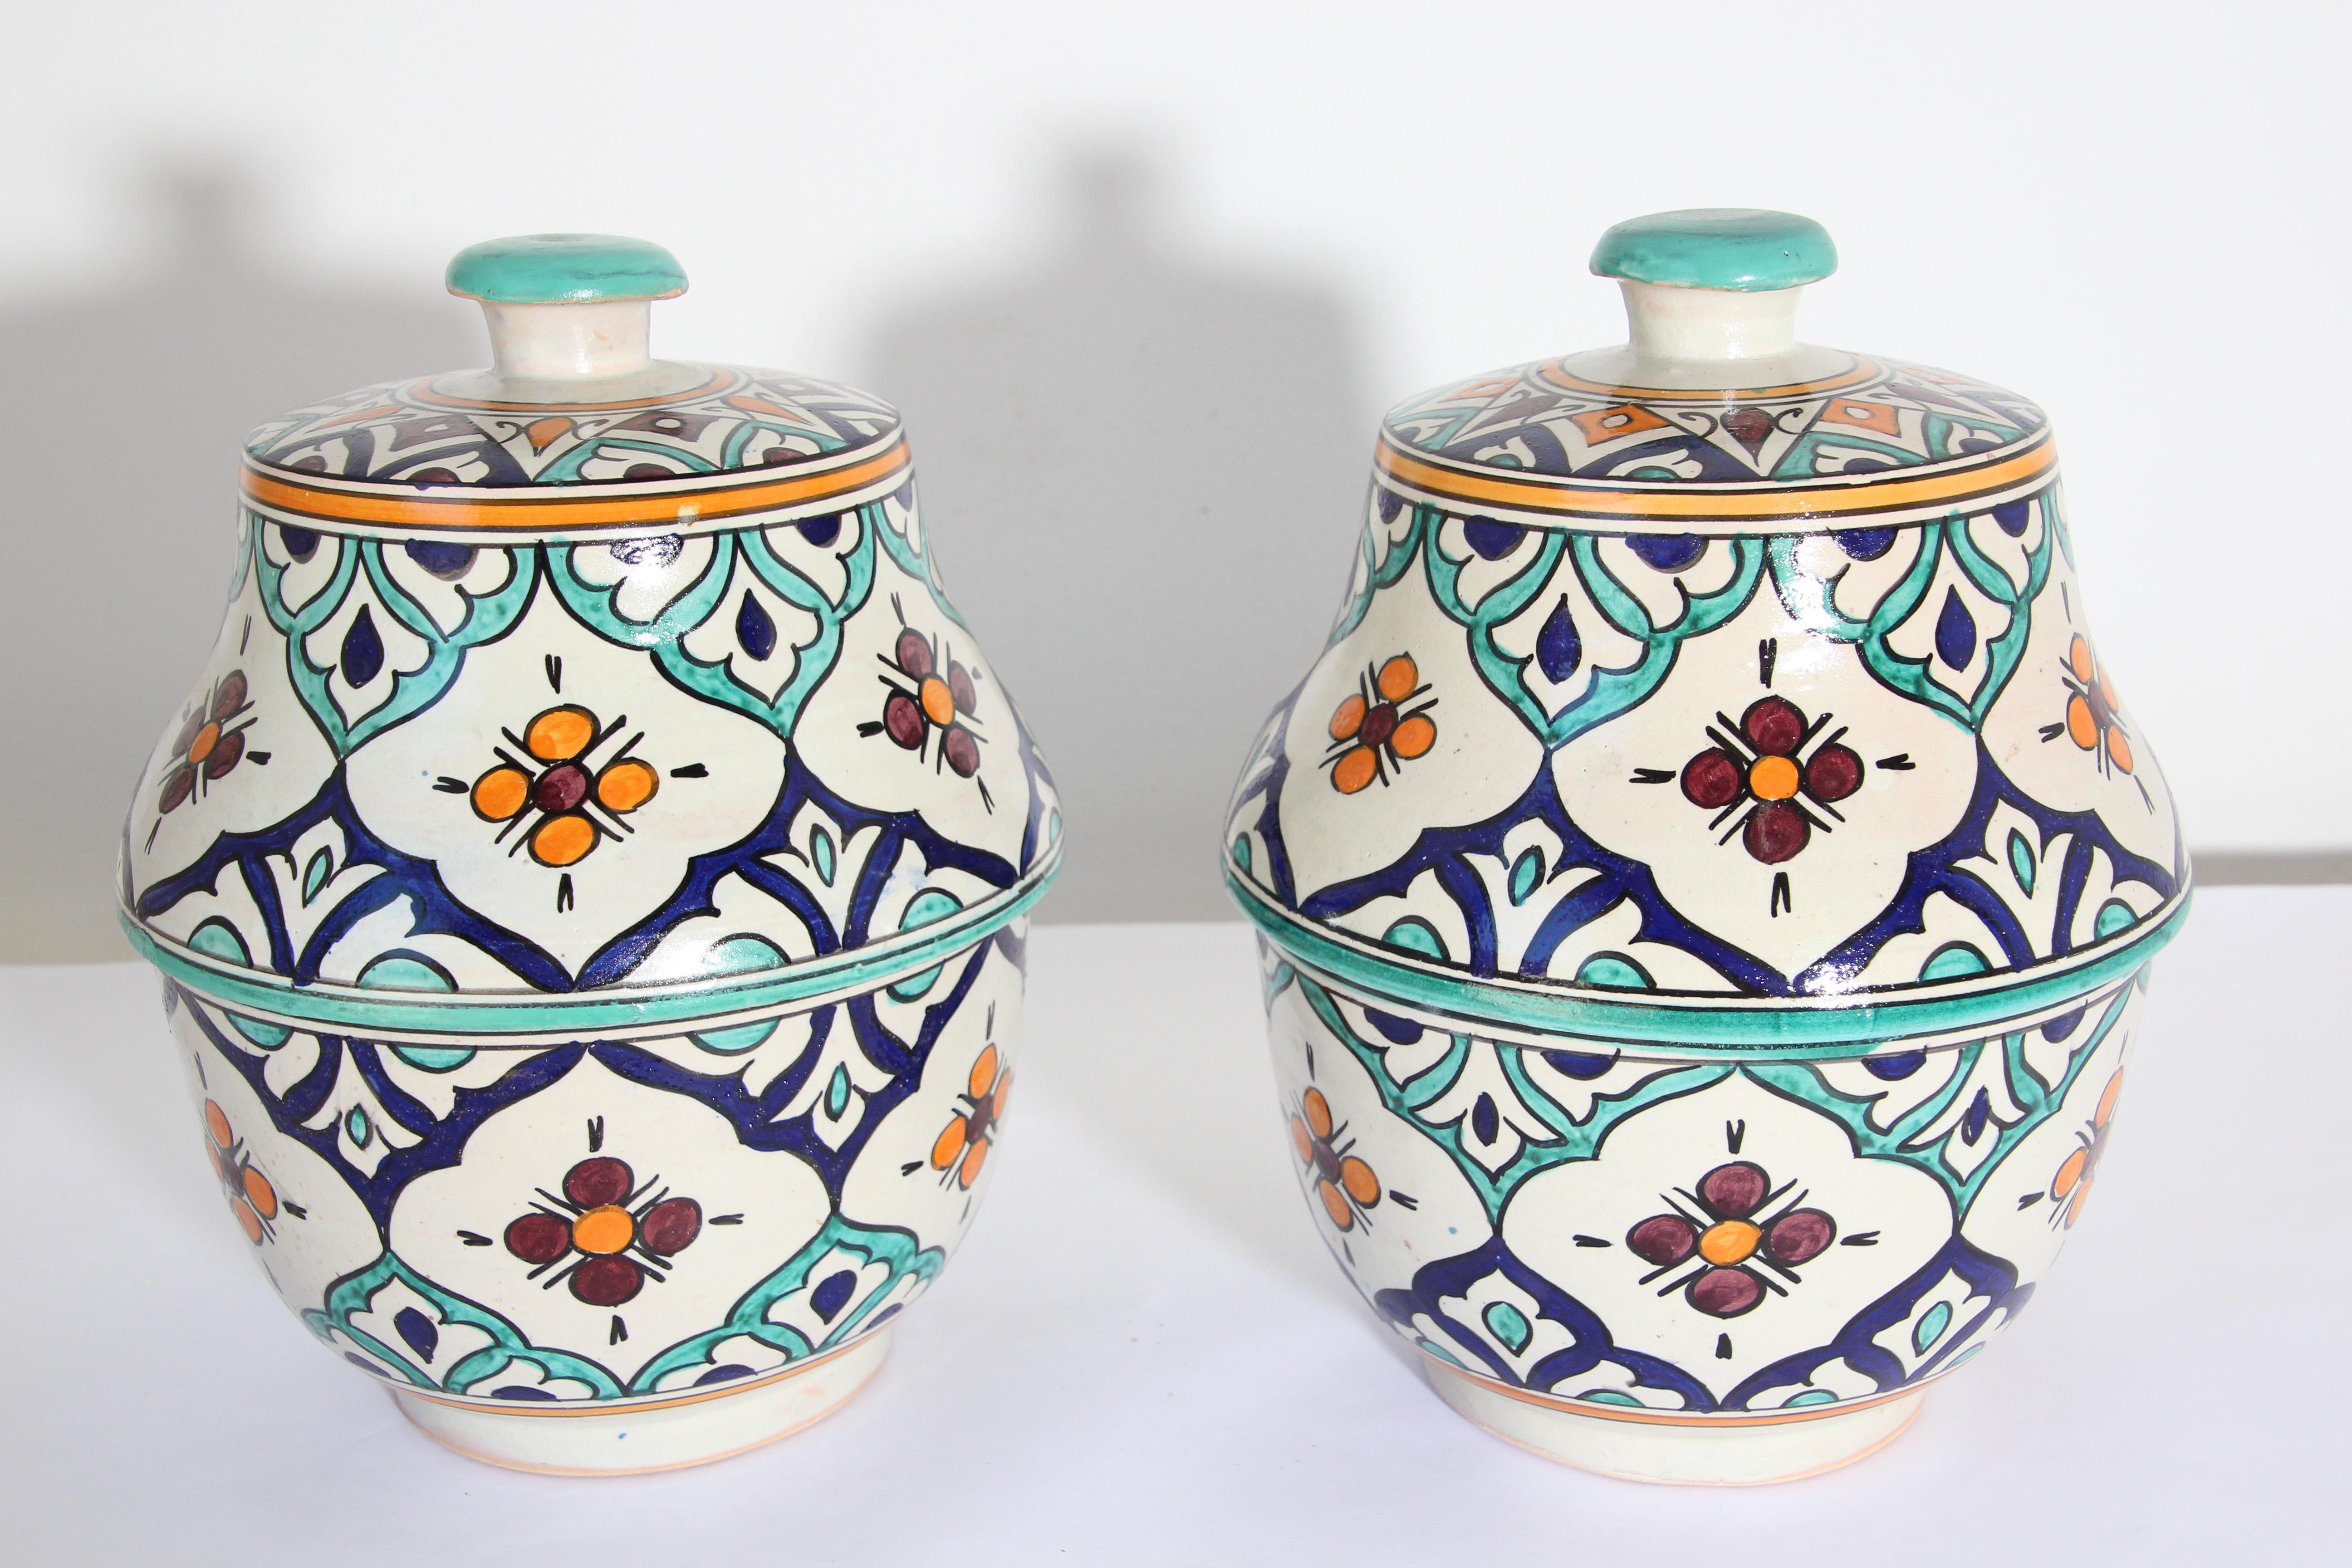 Moroccan Moorish Ceramic Glazed Covered Urns Handcrafted in Fez Morocco For Sale